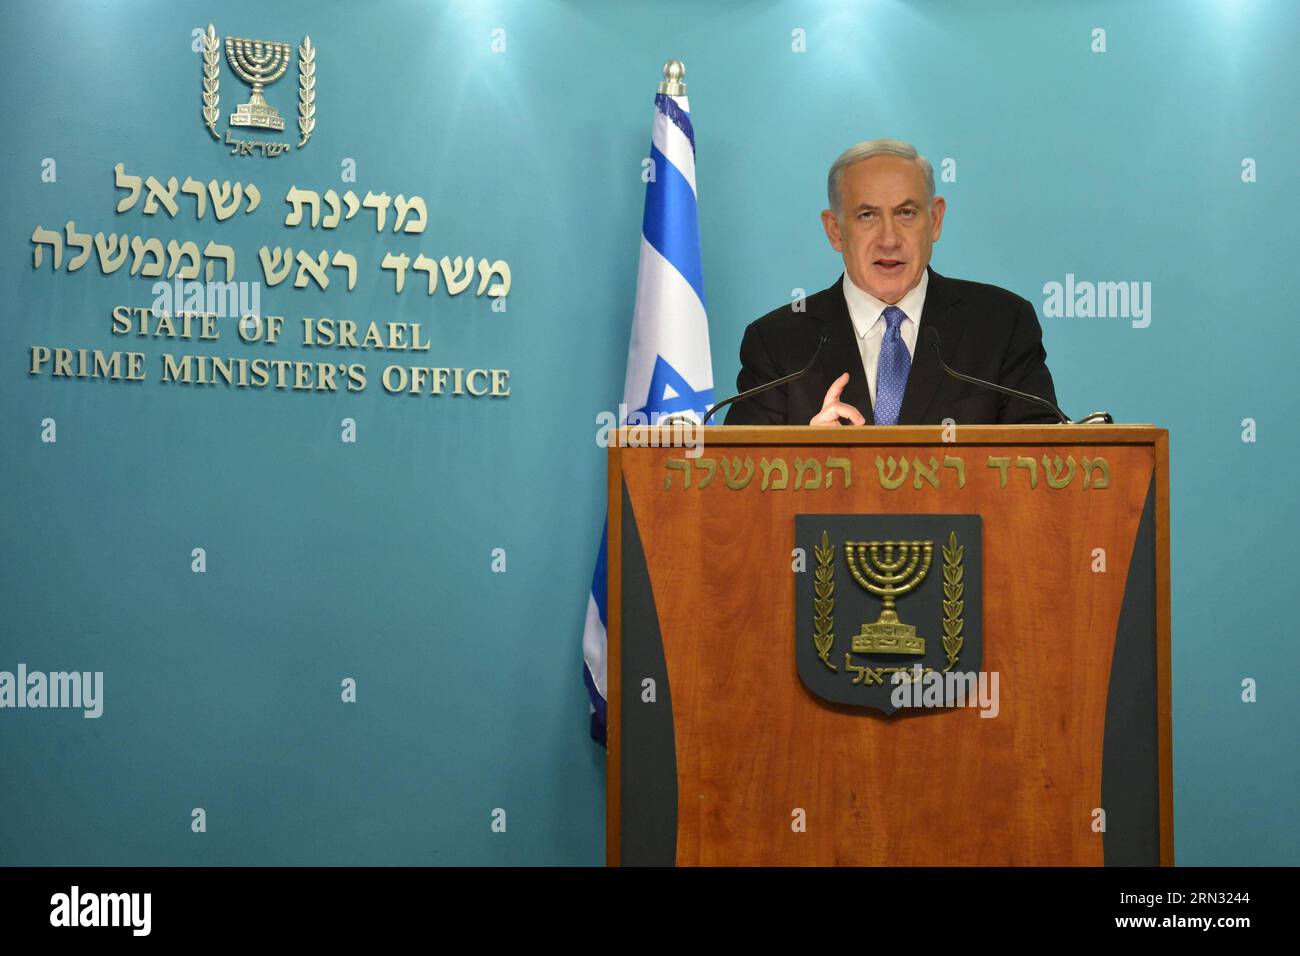 (150403) -- JERUSALEM, April 3, 2015 -- Israeli Prime Minister Benjamin Netanyahu delivers a statement to the press at the Prime Minister s office in Jerusalem, on April 3, 2015. Israeli Prime Minister Benjamin Netanyahu said Friday any framework agreement between Iran and the international community must commit to recognizing Israel s right to exist. GPO/) -ISRAEL OUT- MIDEAST-JERUSALEM-ISRAEL-PM-IRAN-FRAMEWORK DEAL-NUCLEAR RISK-STATEMENT KobixGideon PUBLICATIONxNOTxINxCHN   Jerusalem April 3 2015 Israeli Prime Ministers Benjamin Netanyahu delivers a Statement to The Press AT The Prime Minist Stock Photo